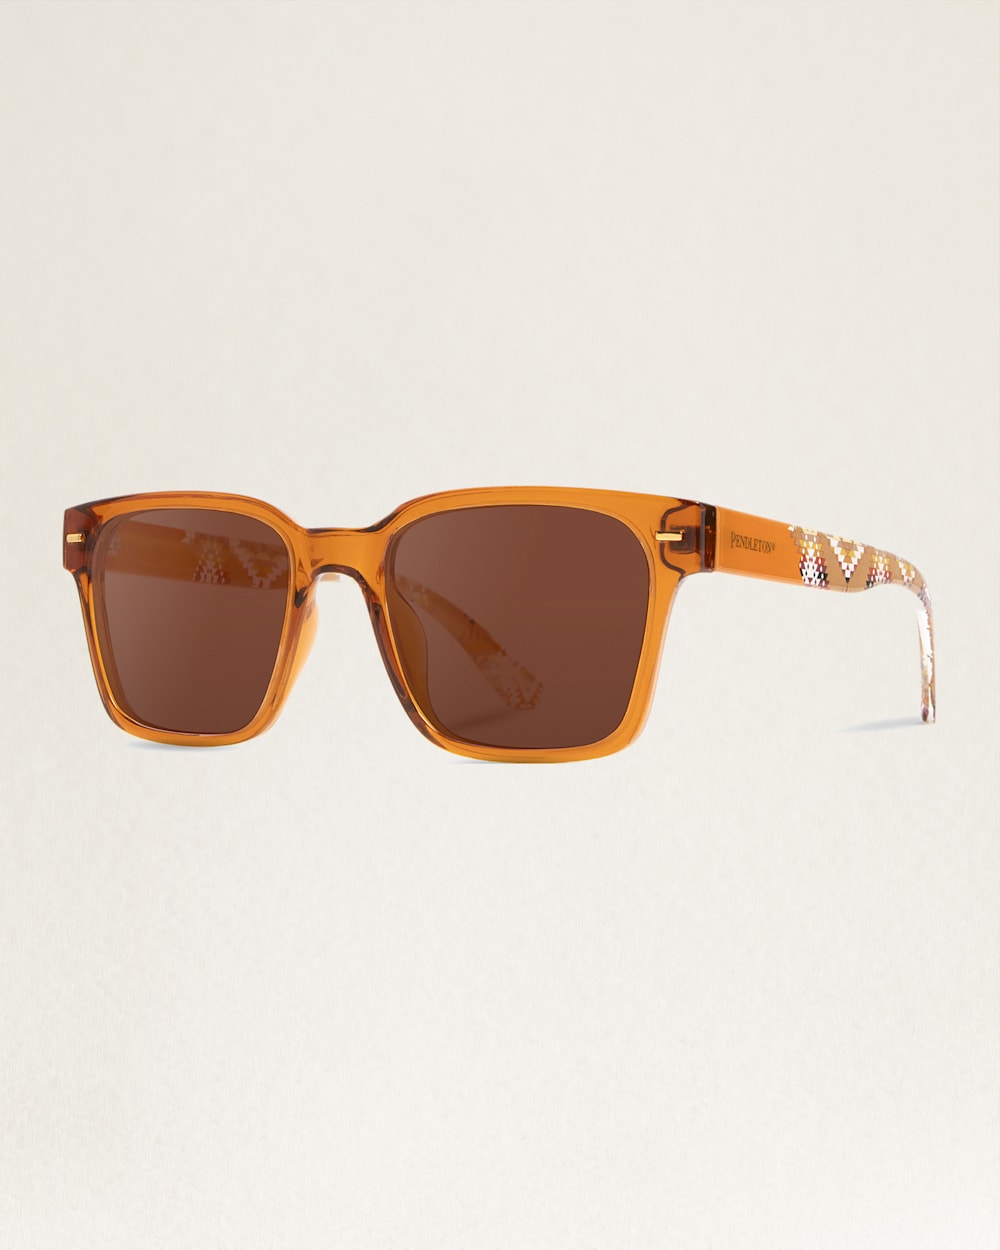 ALTERNATE VIEW OF SHWOOD X PENDLETON COBY POLARIZED SUNGLASSES IN BROWN CRYSTAL/TRAIL image number 2